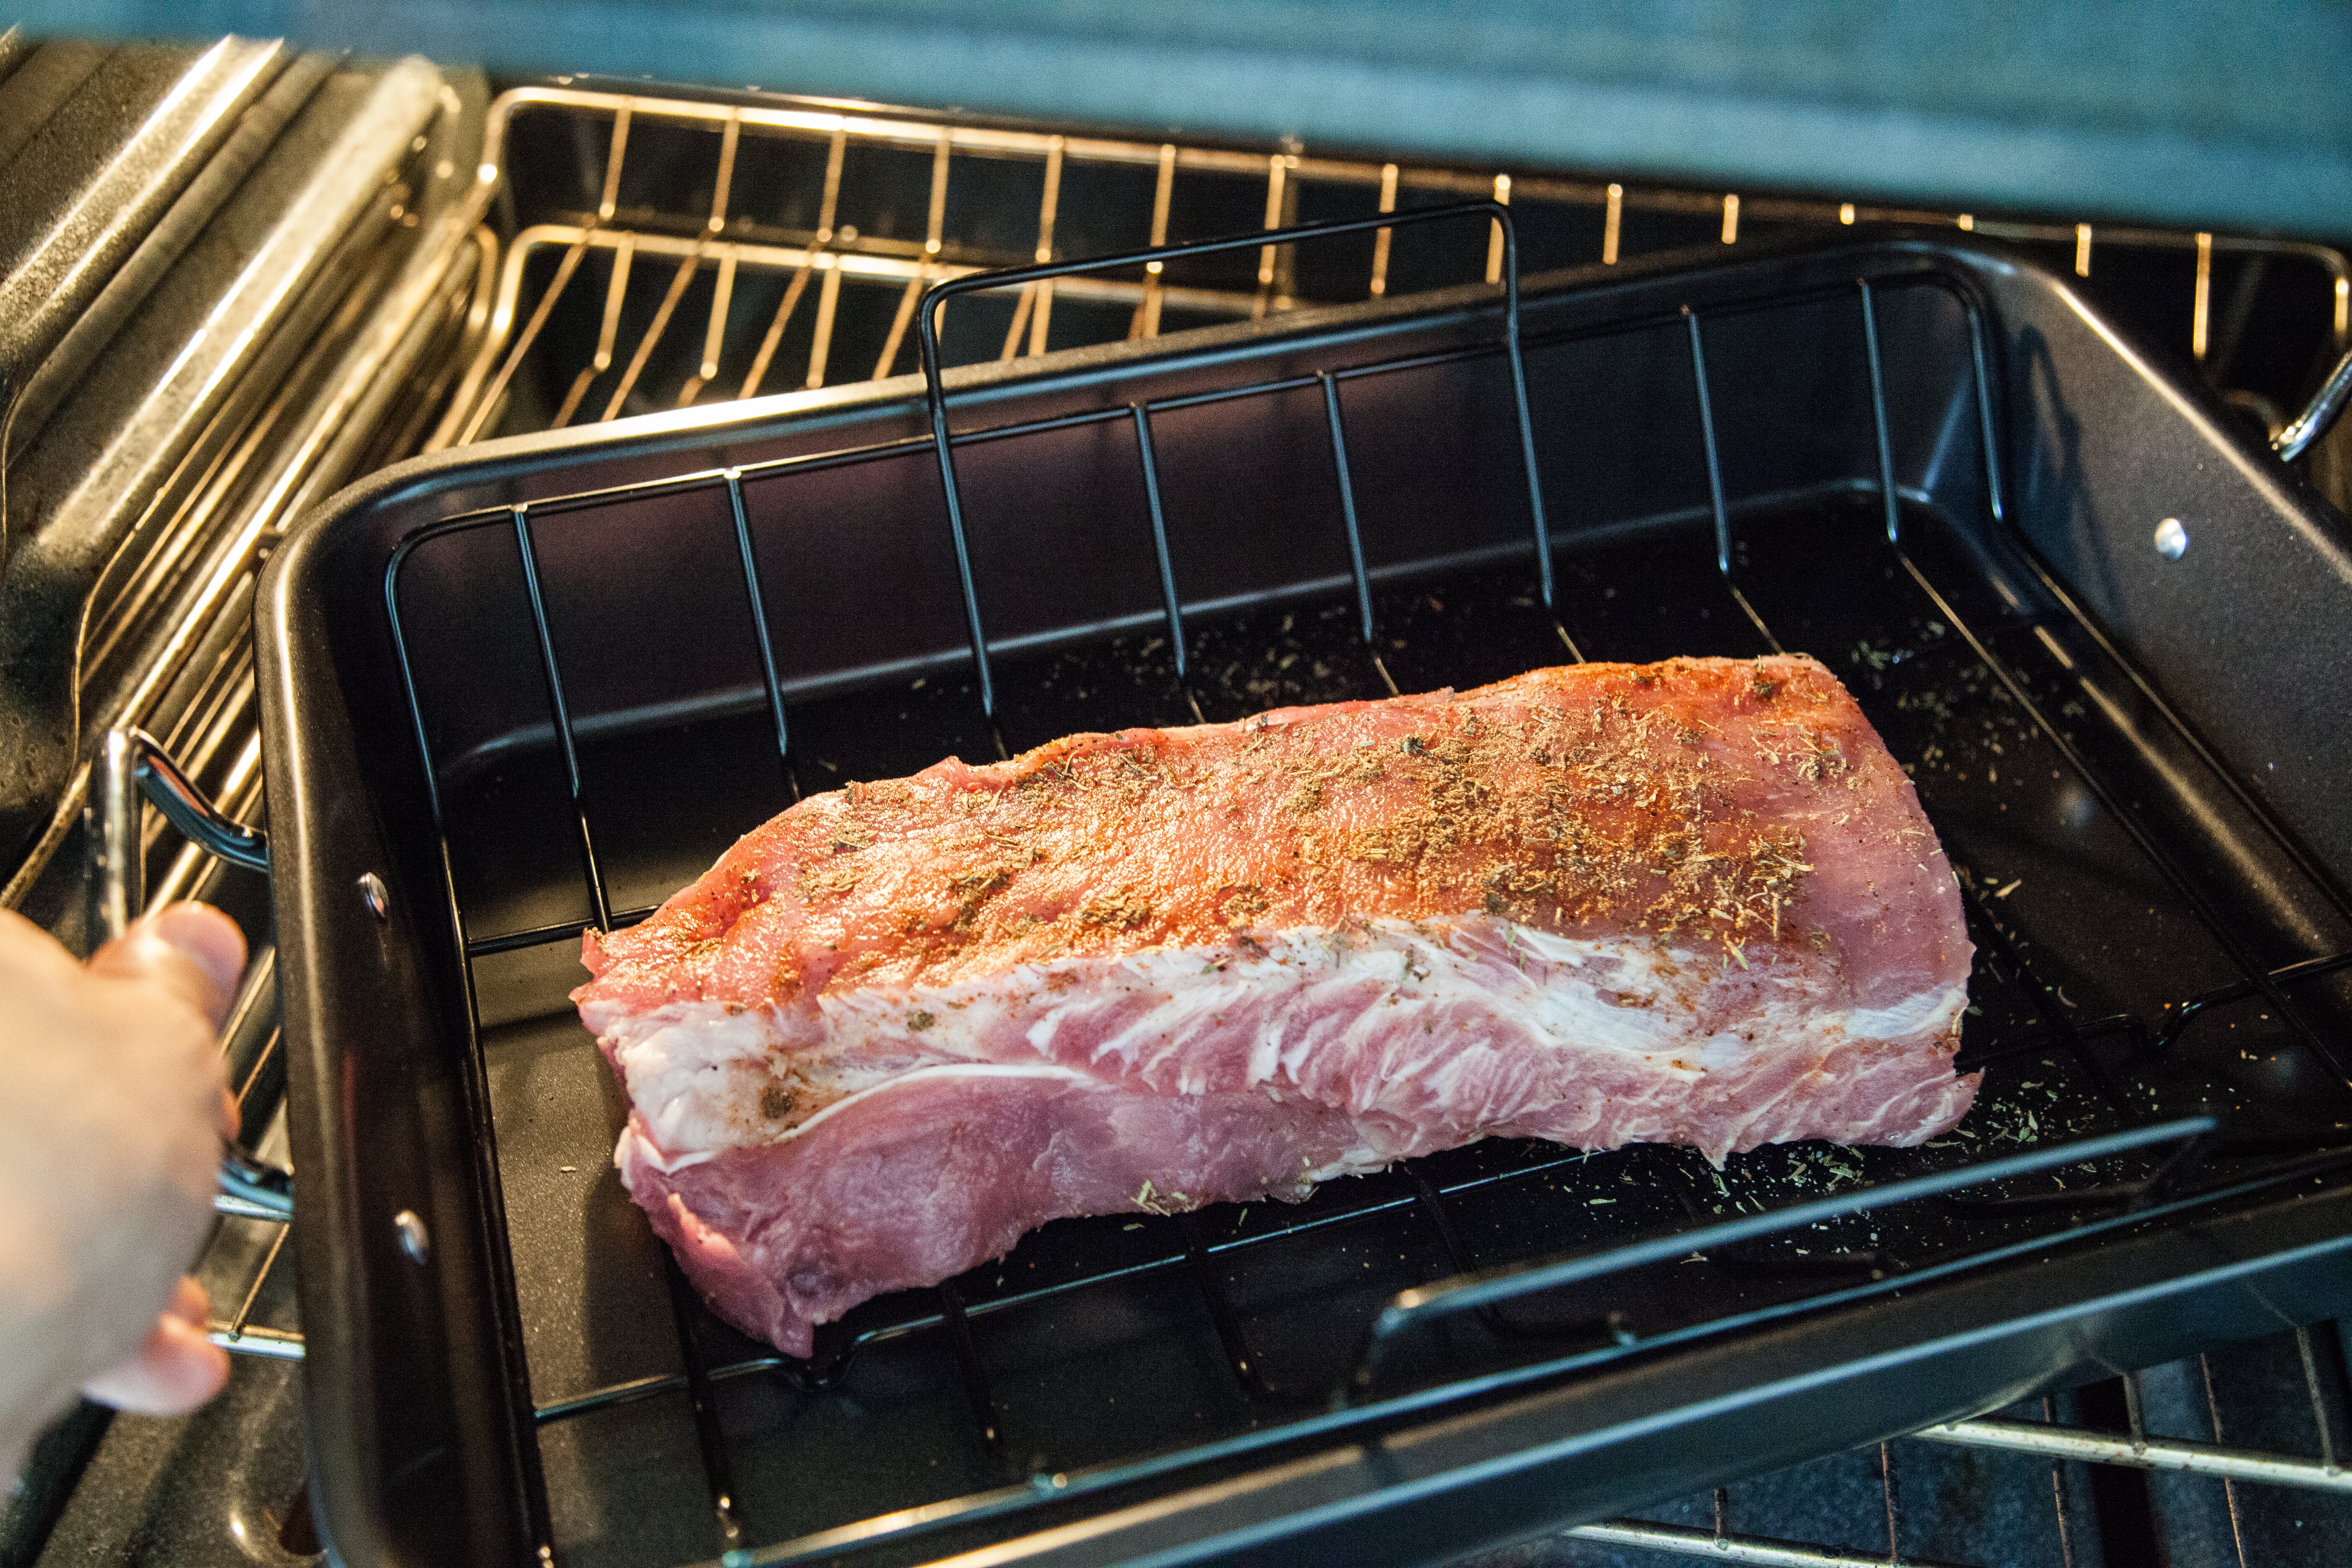 How to Bake a 1.5 Pound Pork Tenderloin (with Pictures) | eHow